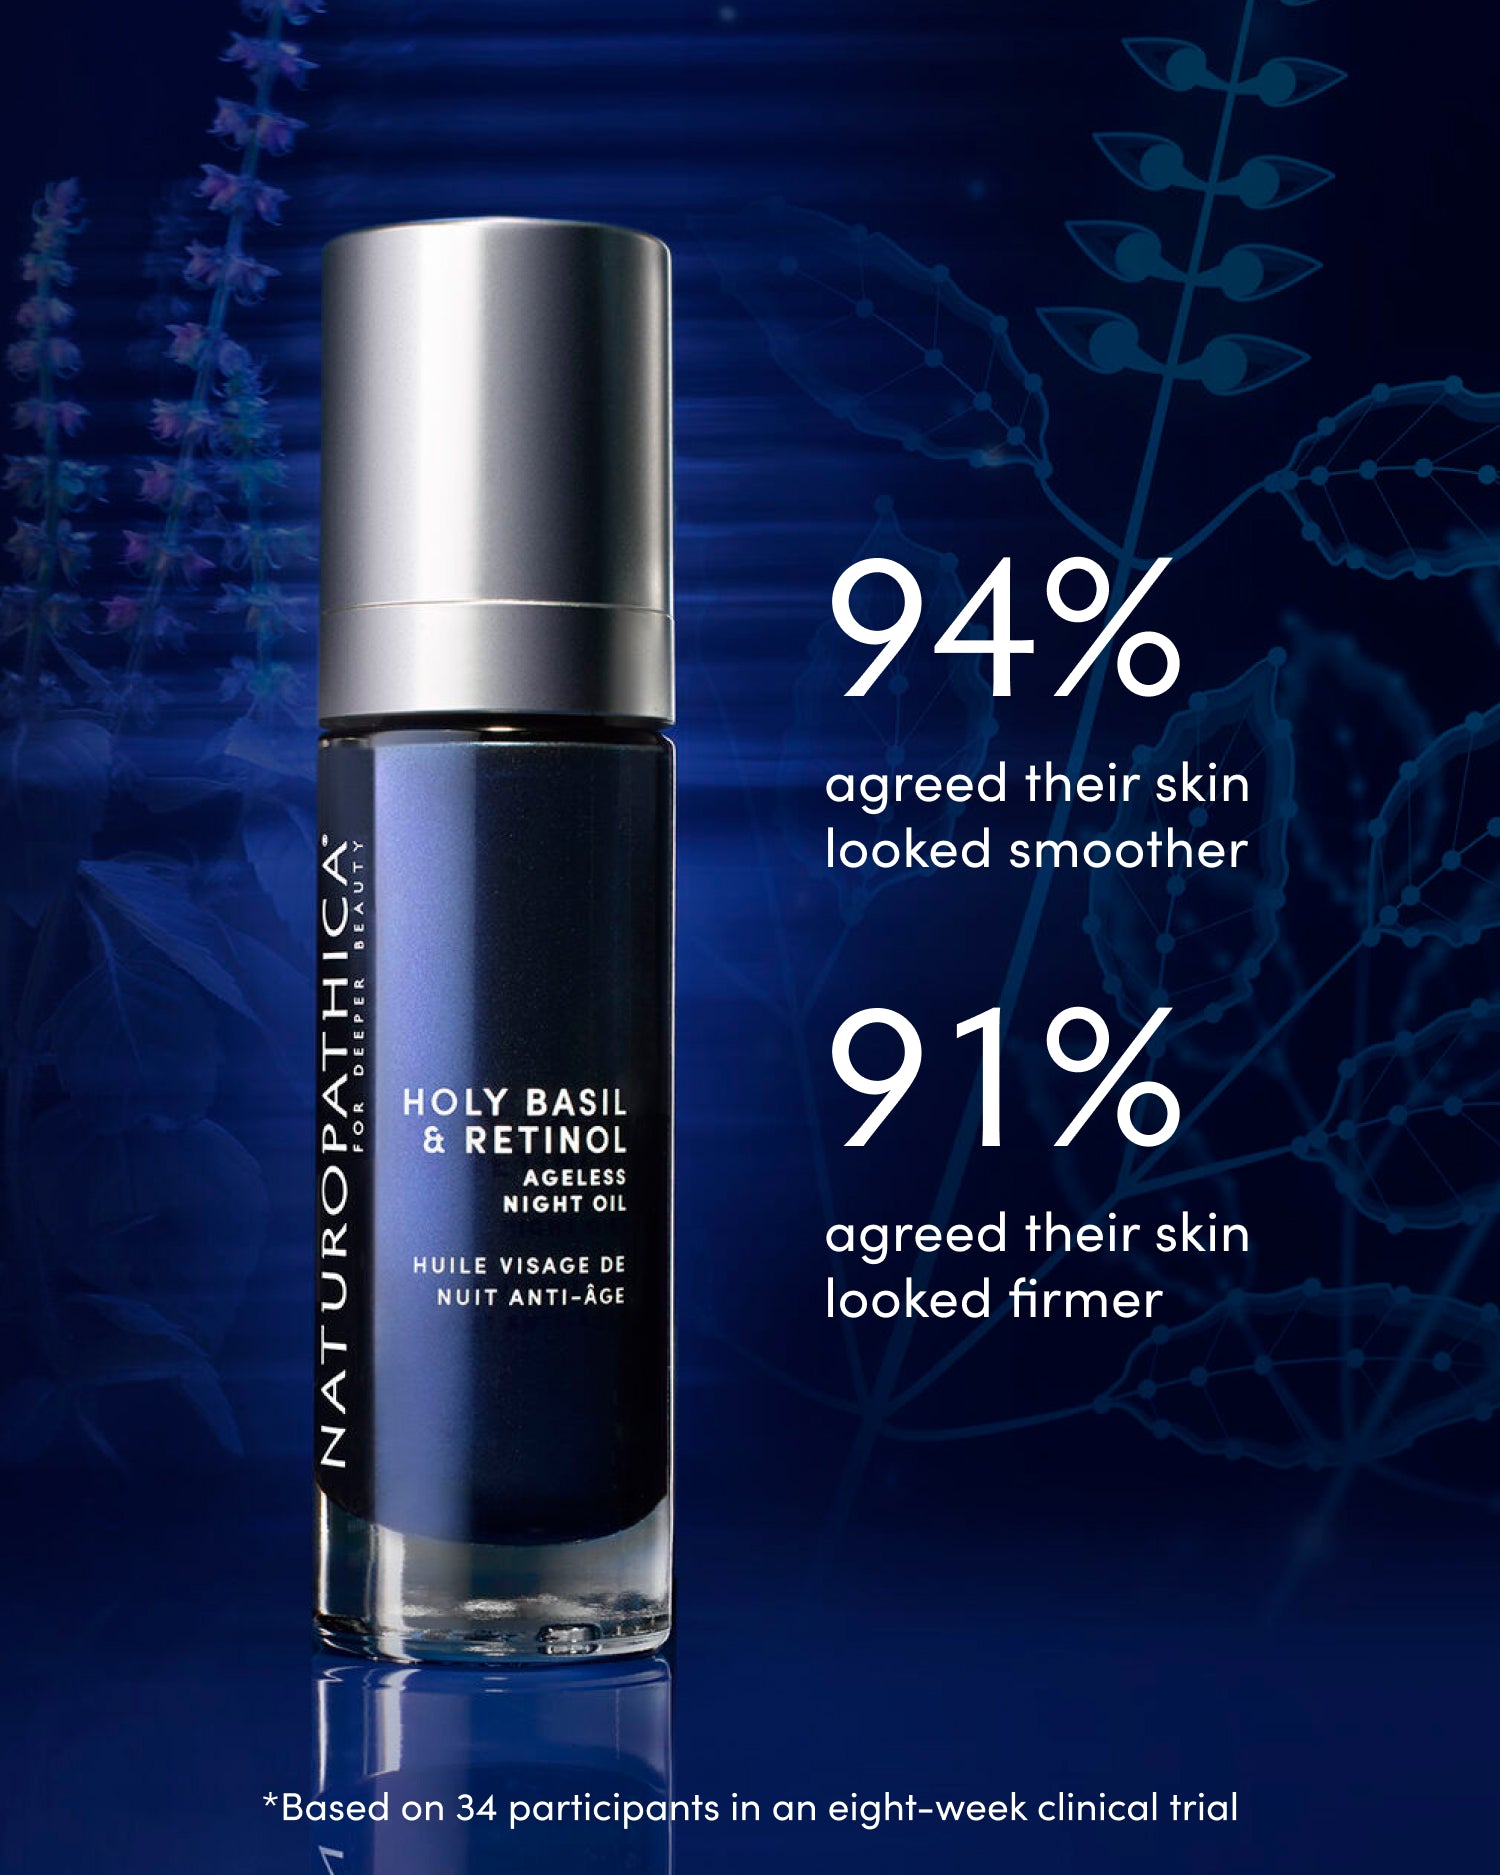 Holy Basil & Retinol Ageless Night Oil clinical trial results